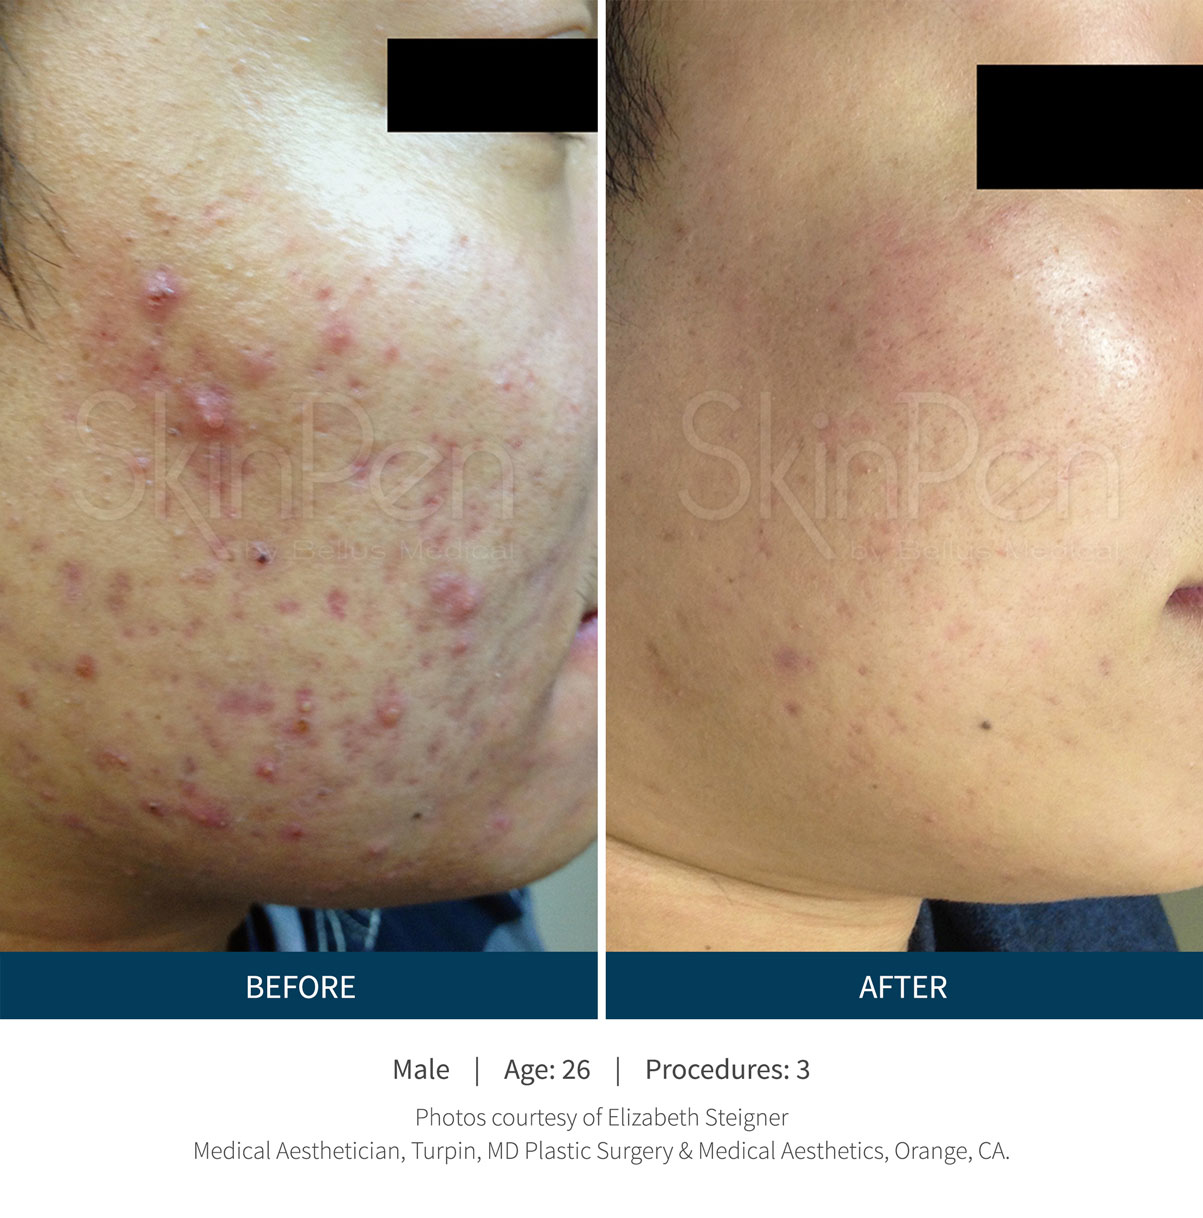 Before and After SkinPen to reduce acne damage and scarring